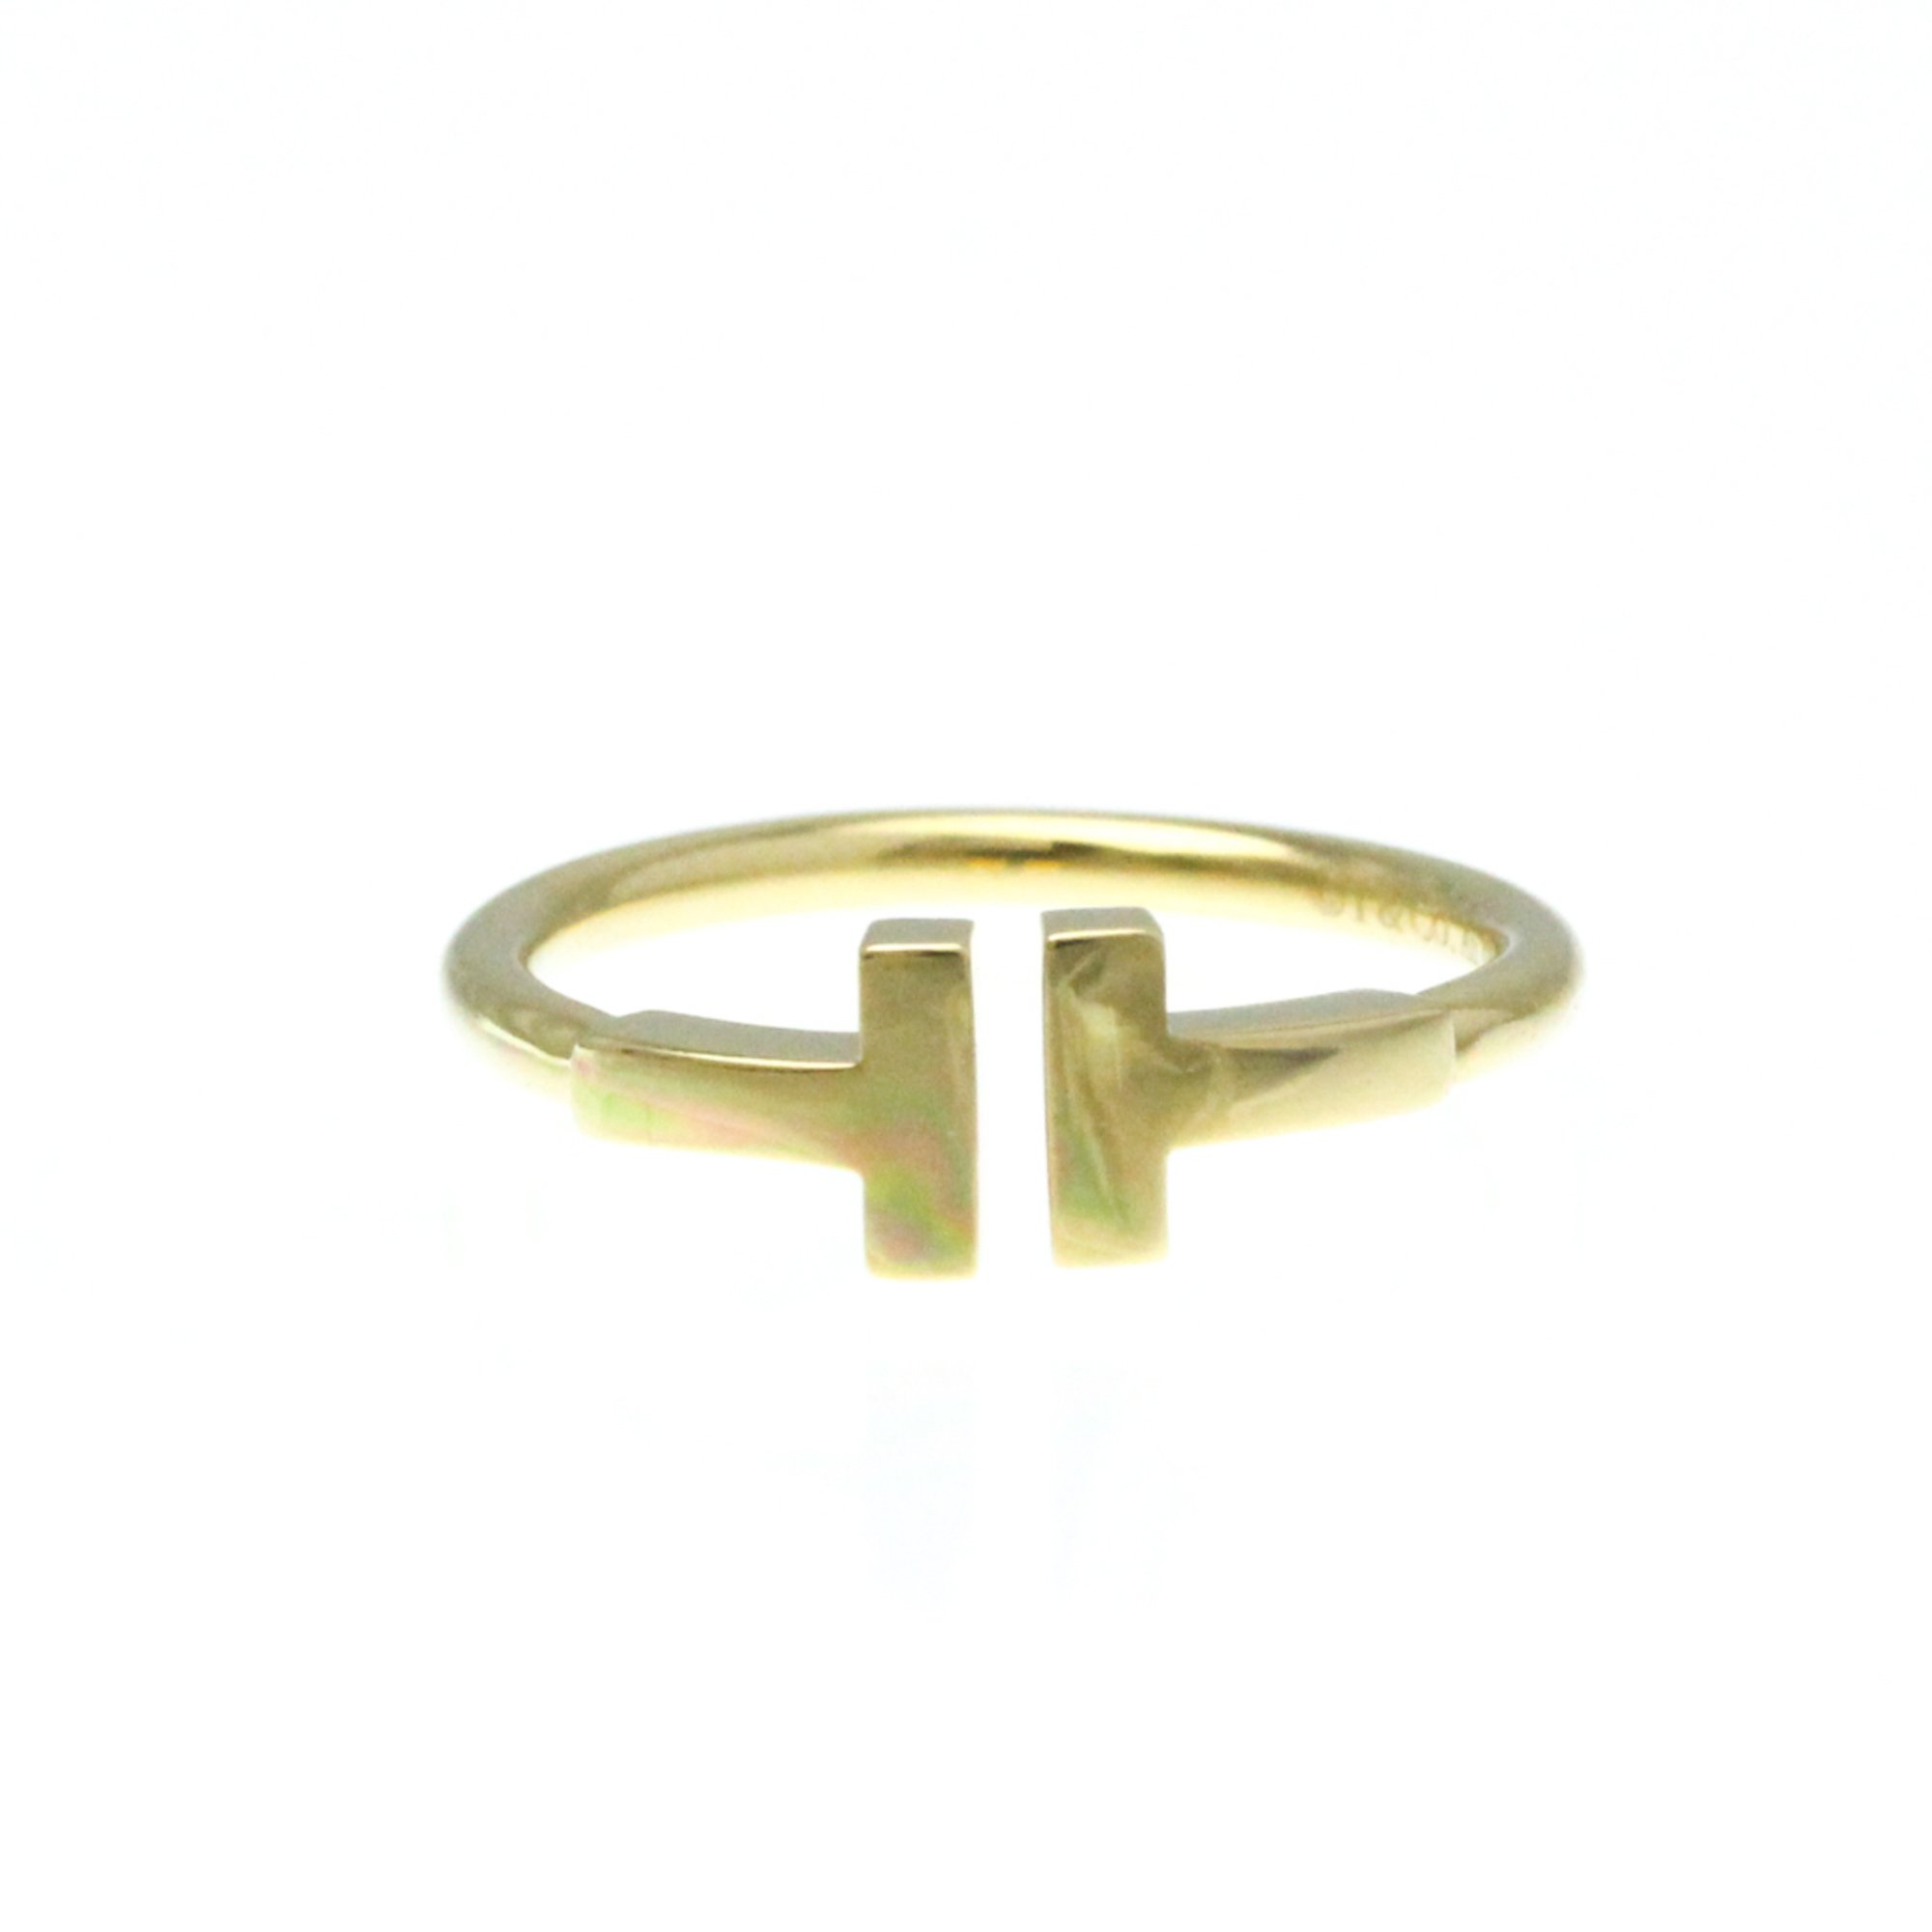 Tiffany T Wire Ring Yellow Gold (18K) Band Ring